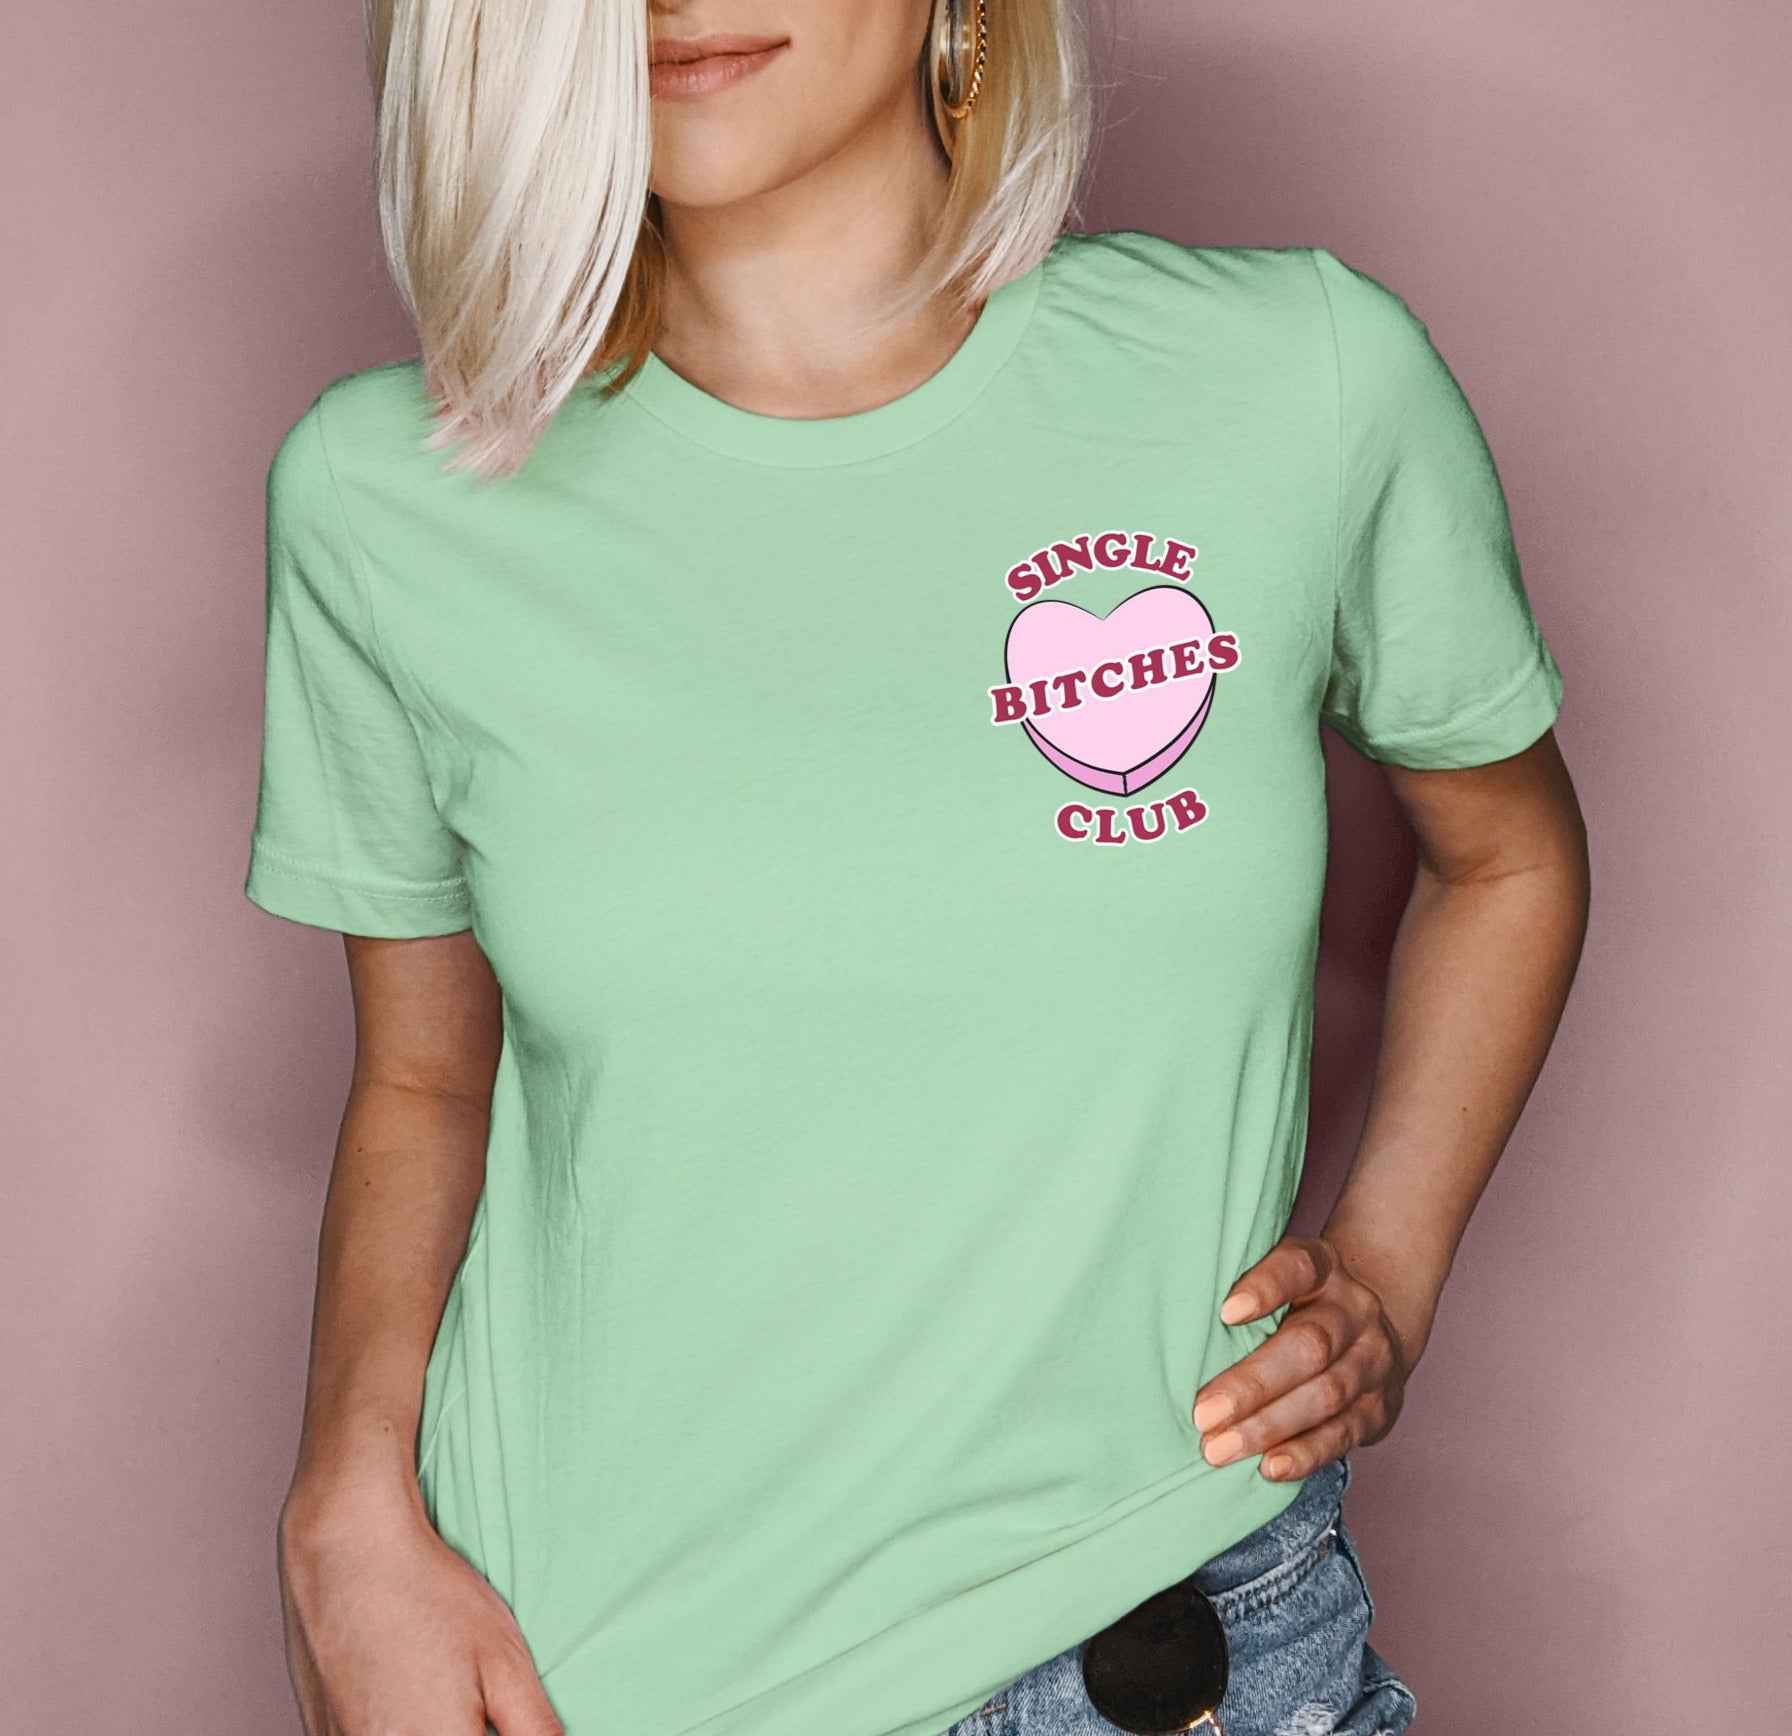 Mint shirt with a candy heart saying single bitches club - HighCiti